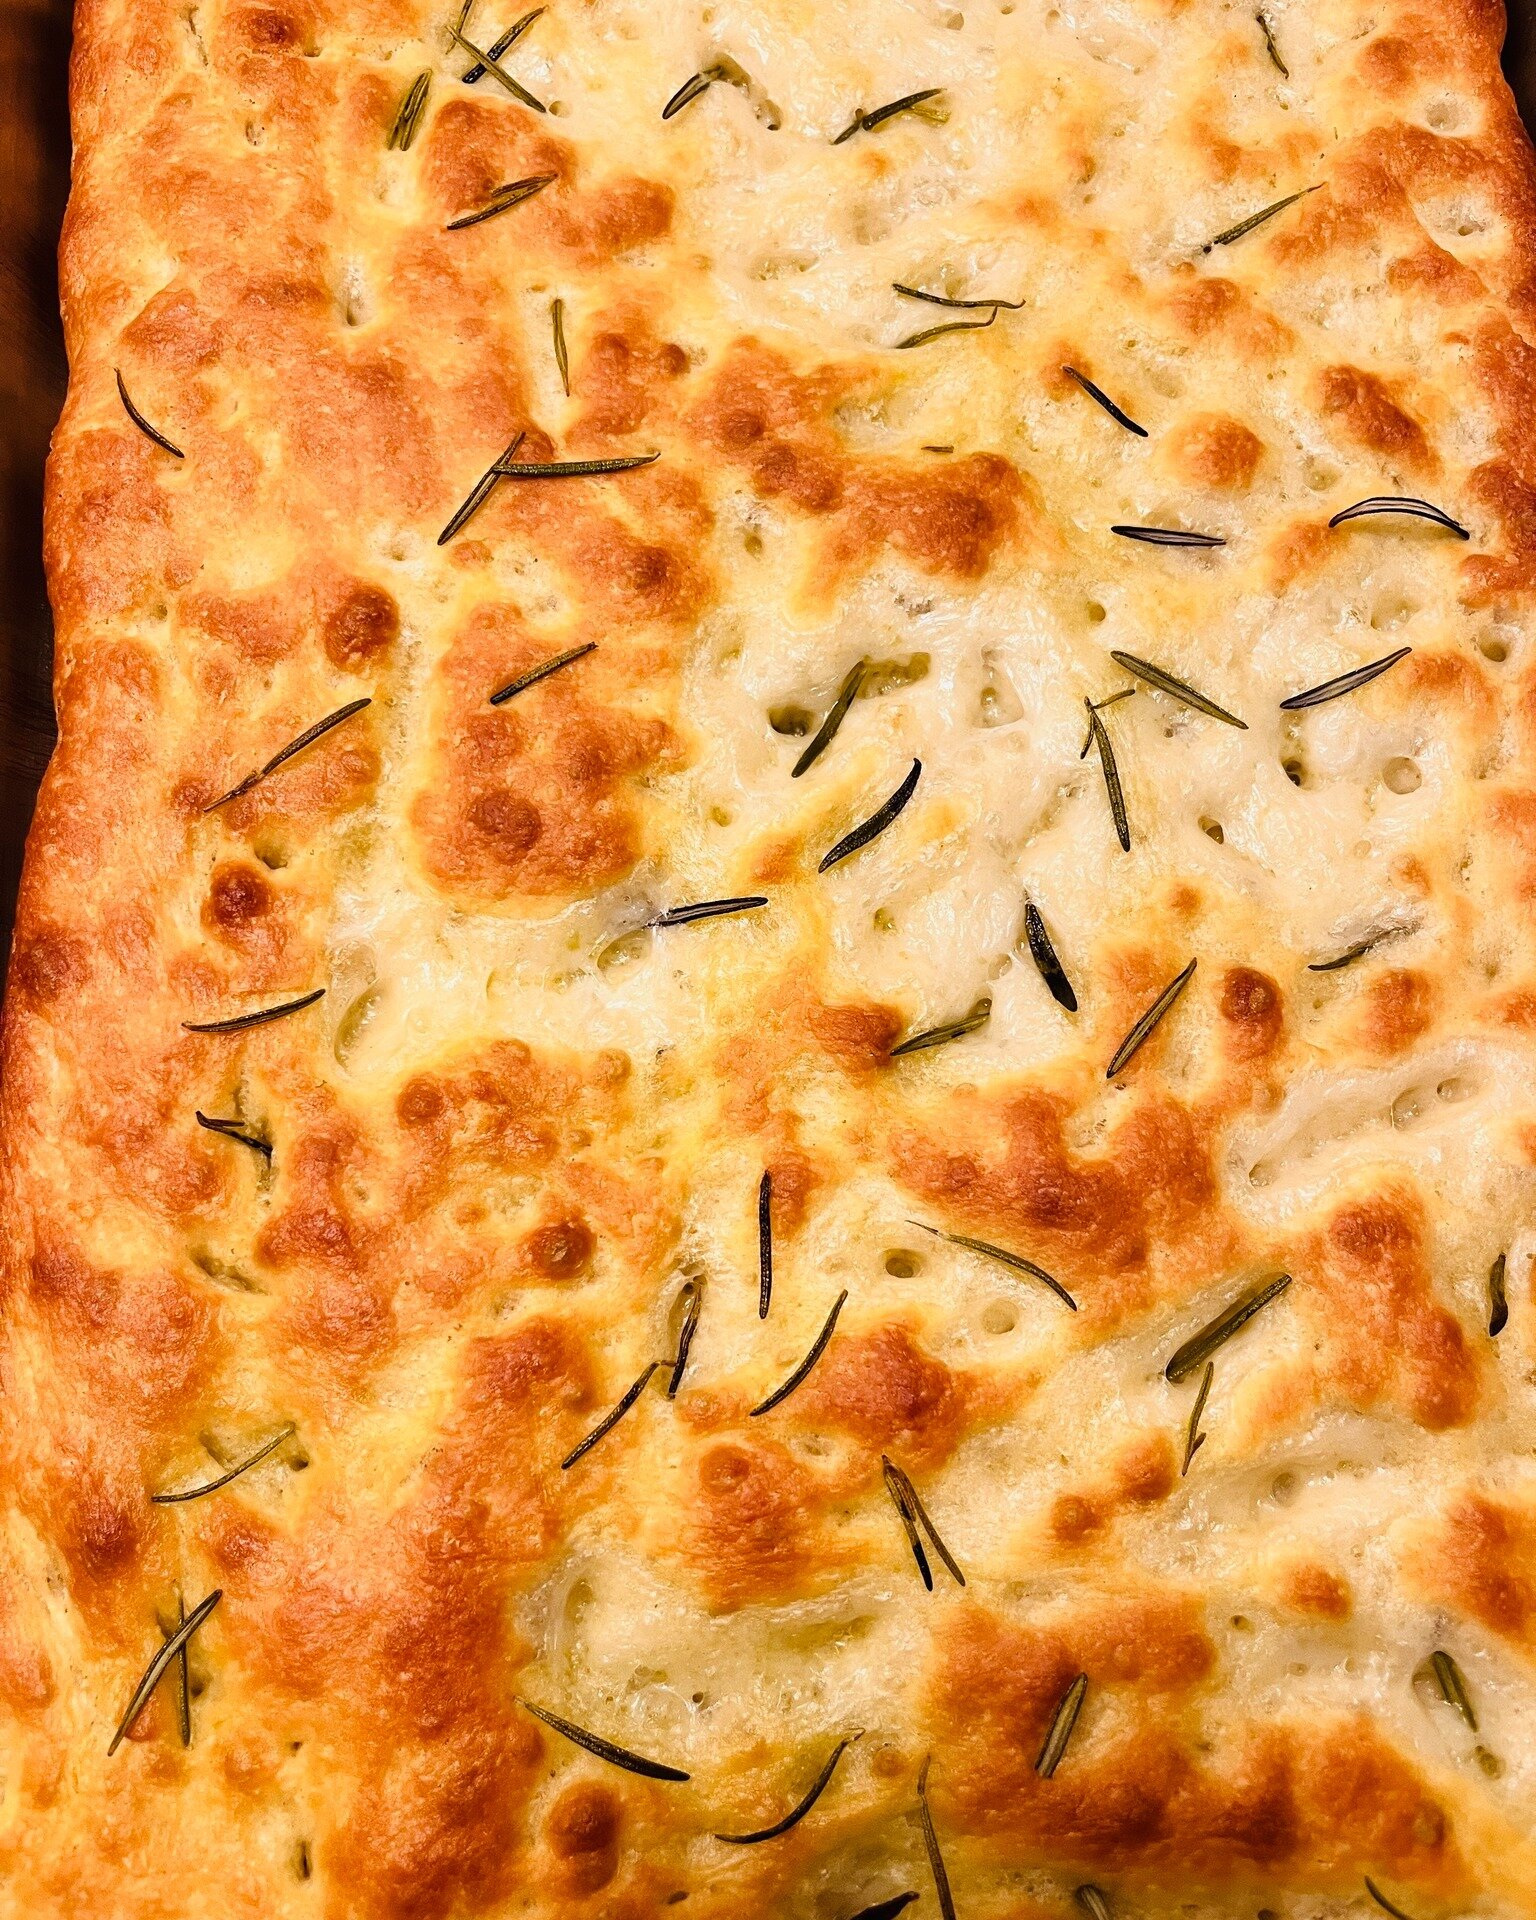 🌟 Dive into deliciousness with our freshly baked focaccia! 🍞✨ 

Made with the finest ingredients and baked to perfection, our focaccia is a taste of Italy in every bite. Enjoy it on its own or with one of our boards. 

#ambrogiacc #enoteca #focacci